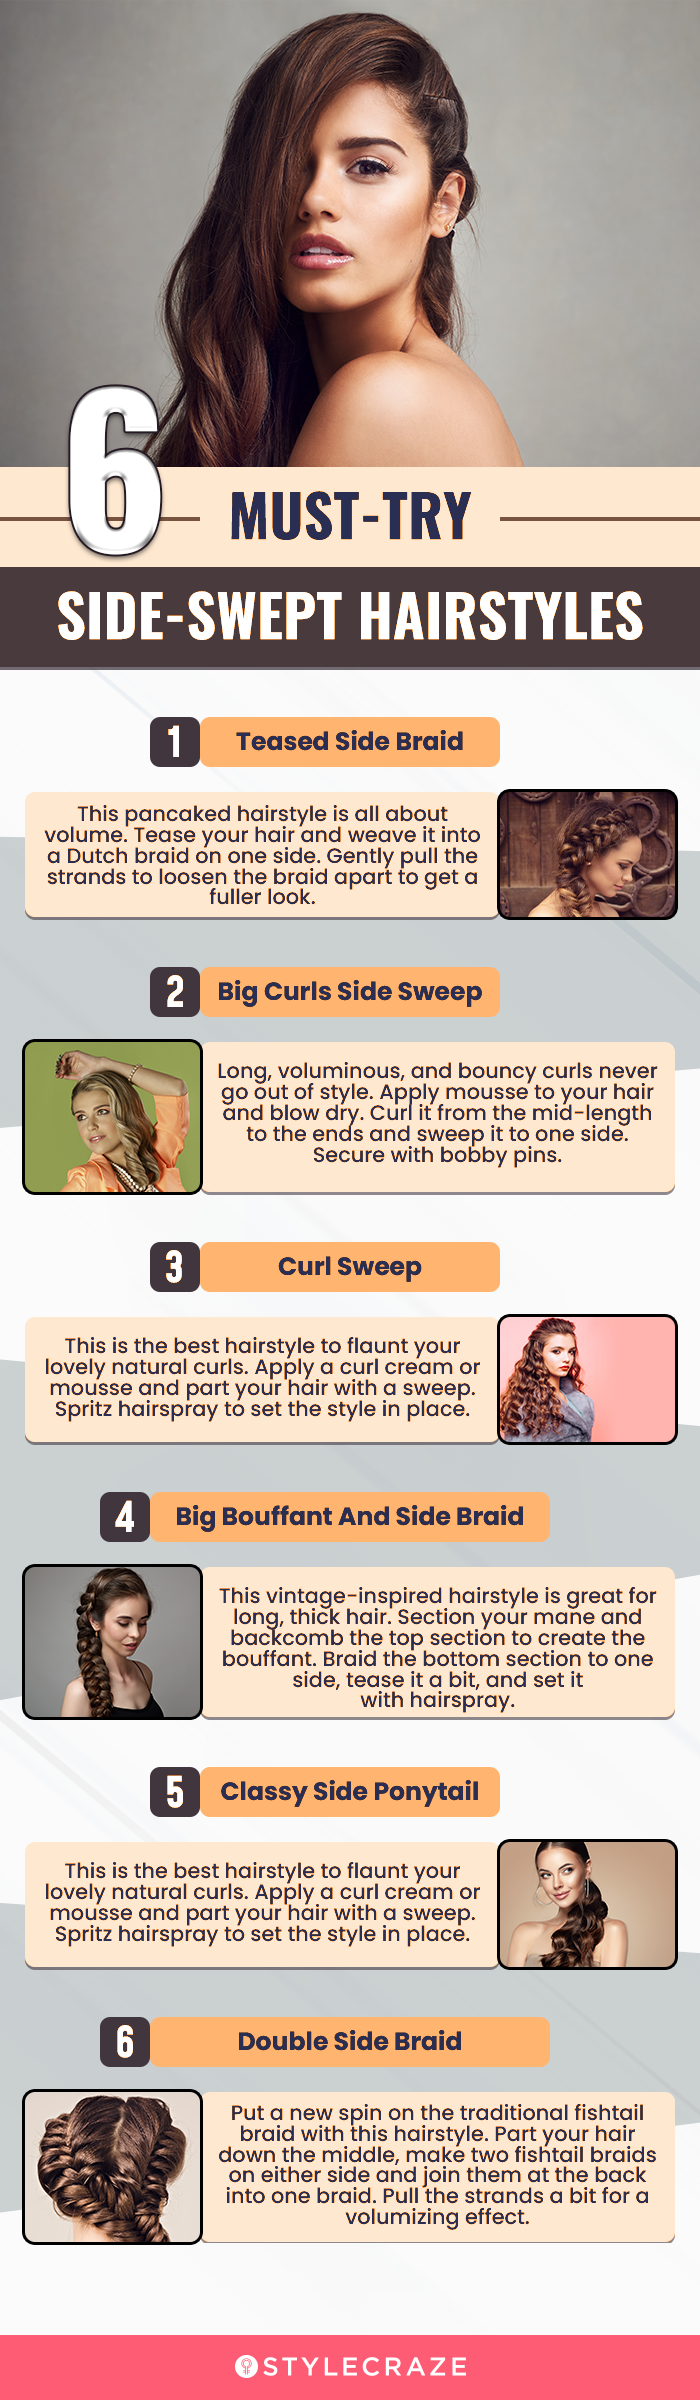 6 musttry side swept hairstyles (infographic)